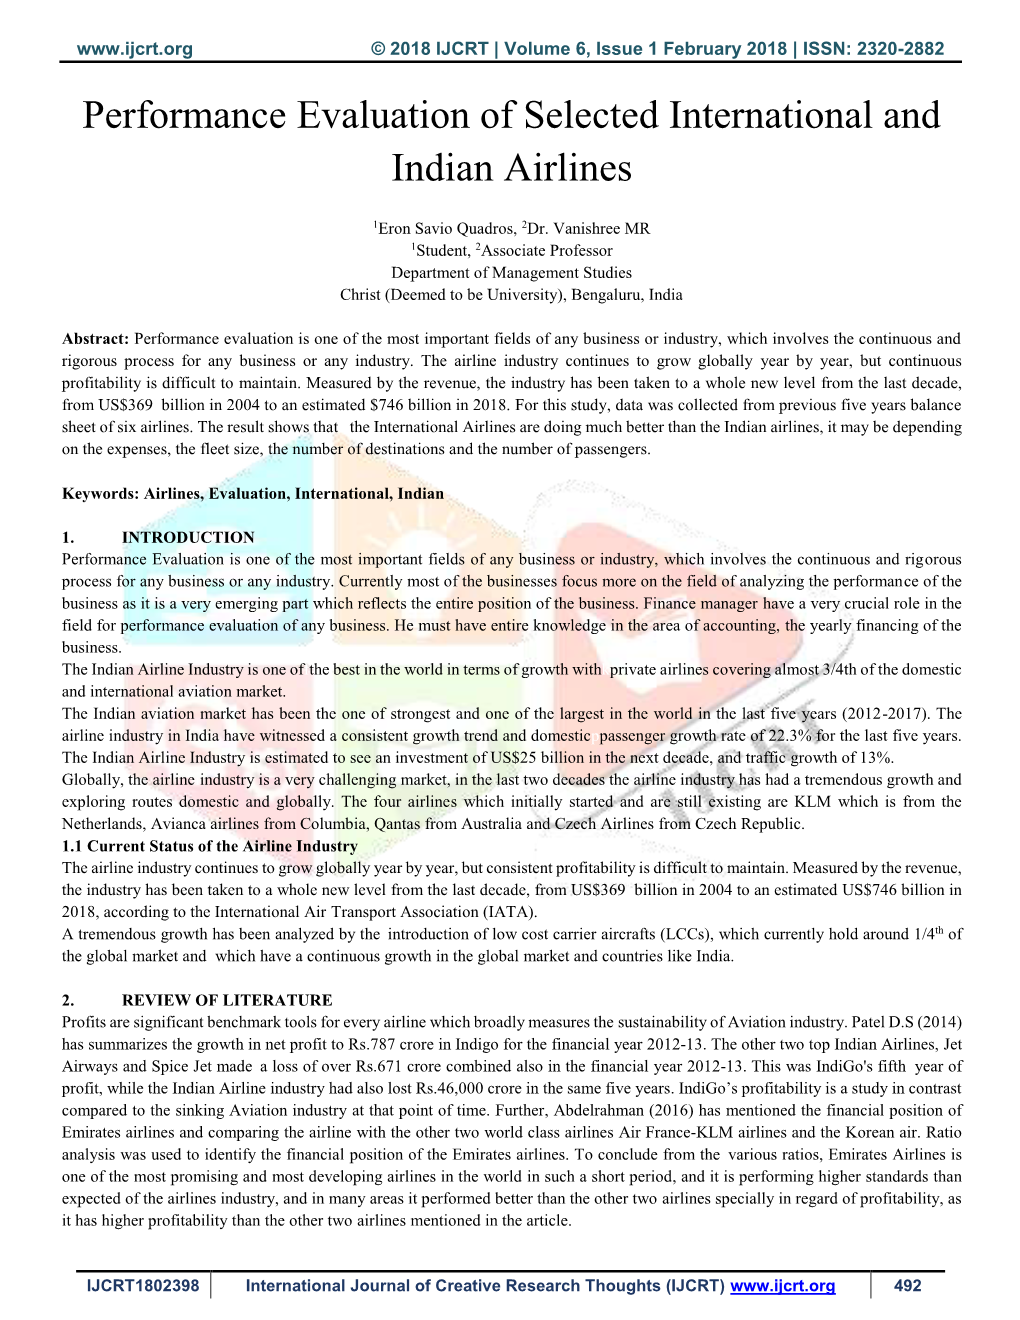 Performance Evaluation of Selected International and Indian Airlines